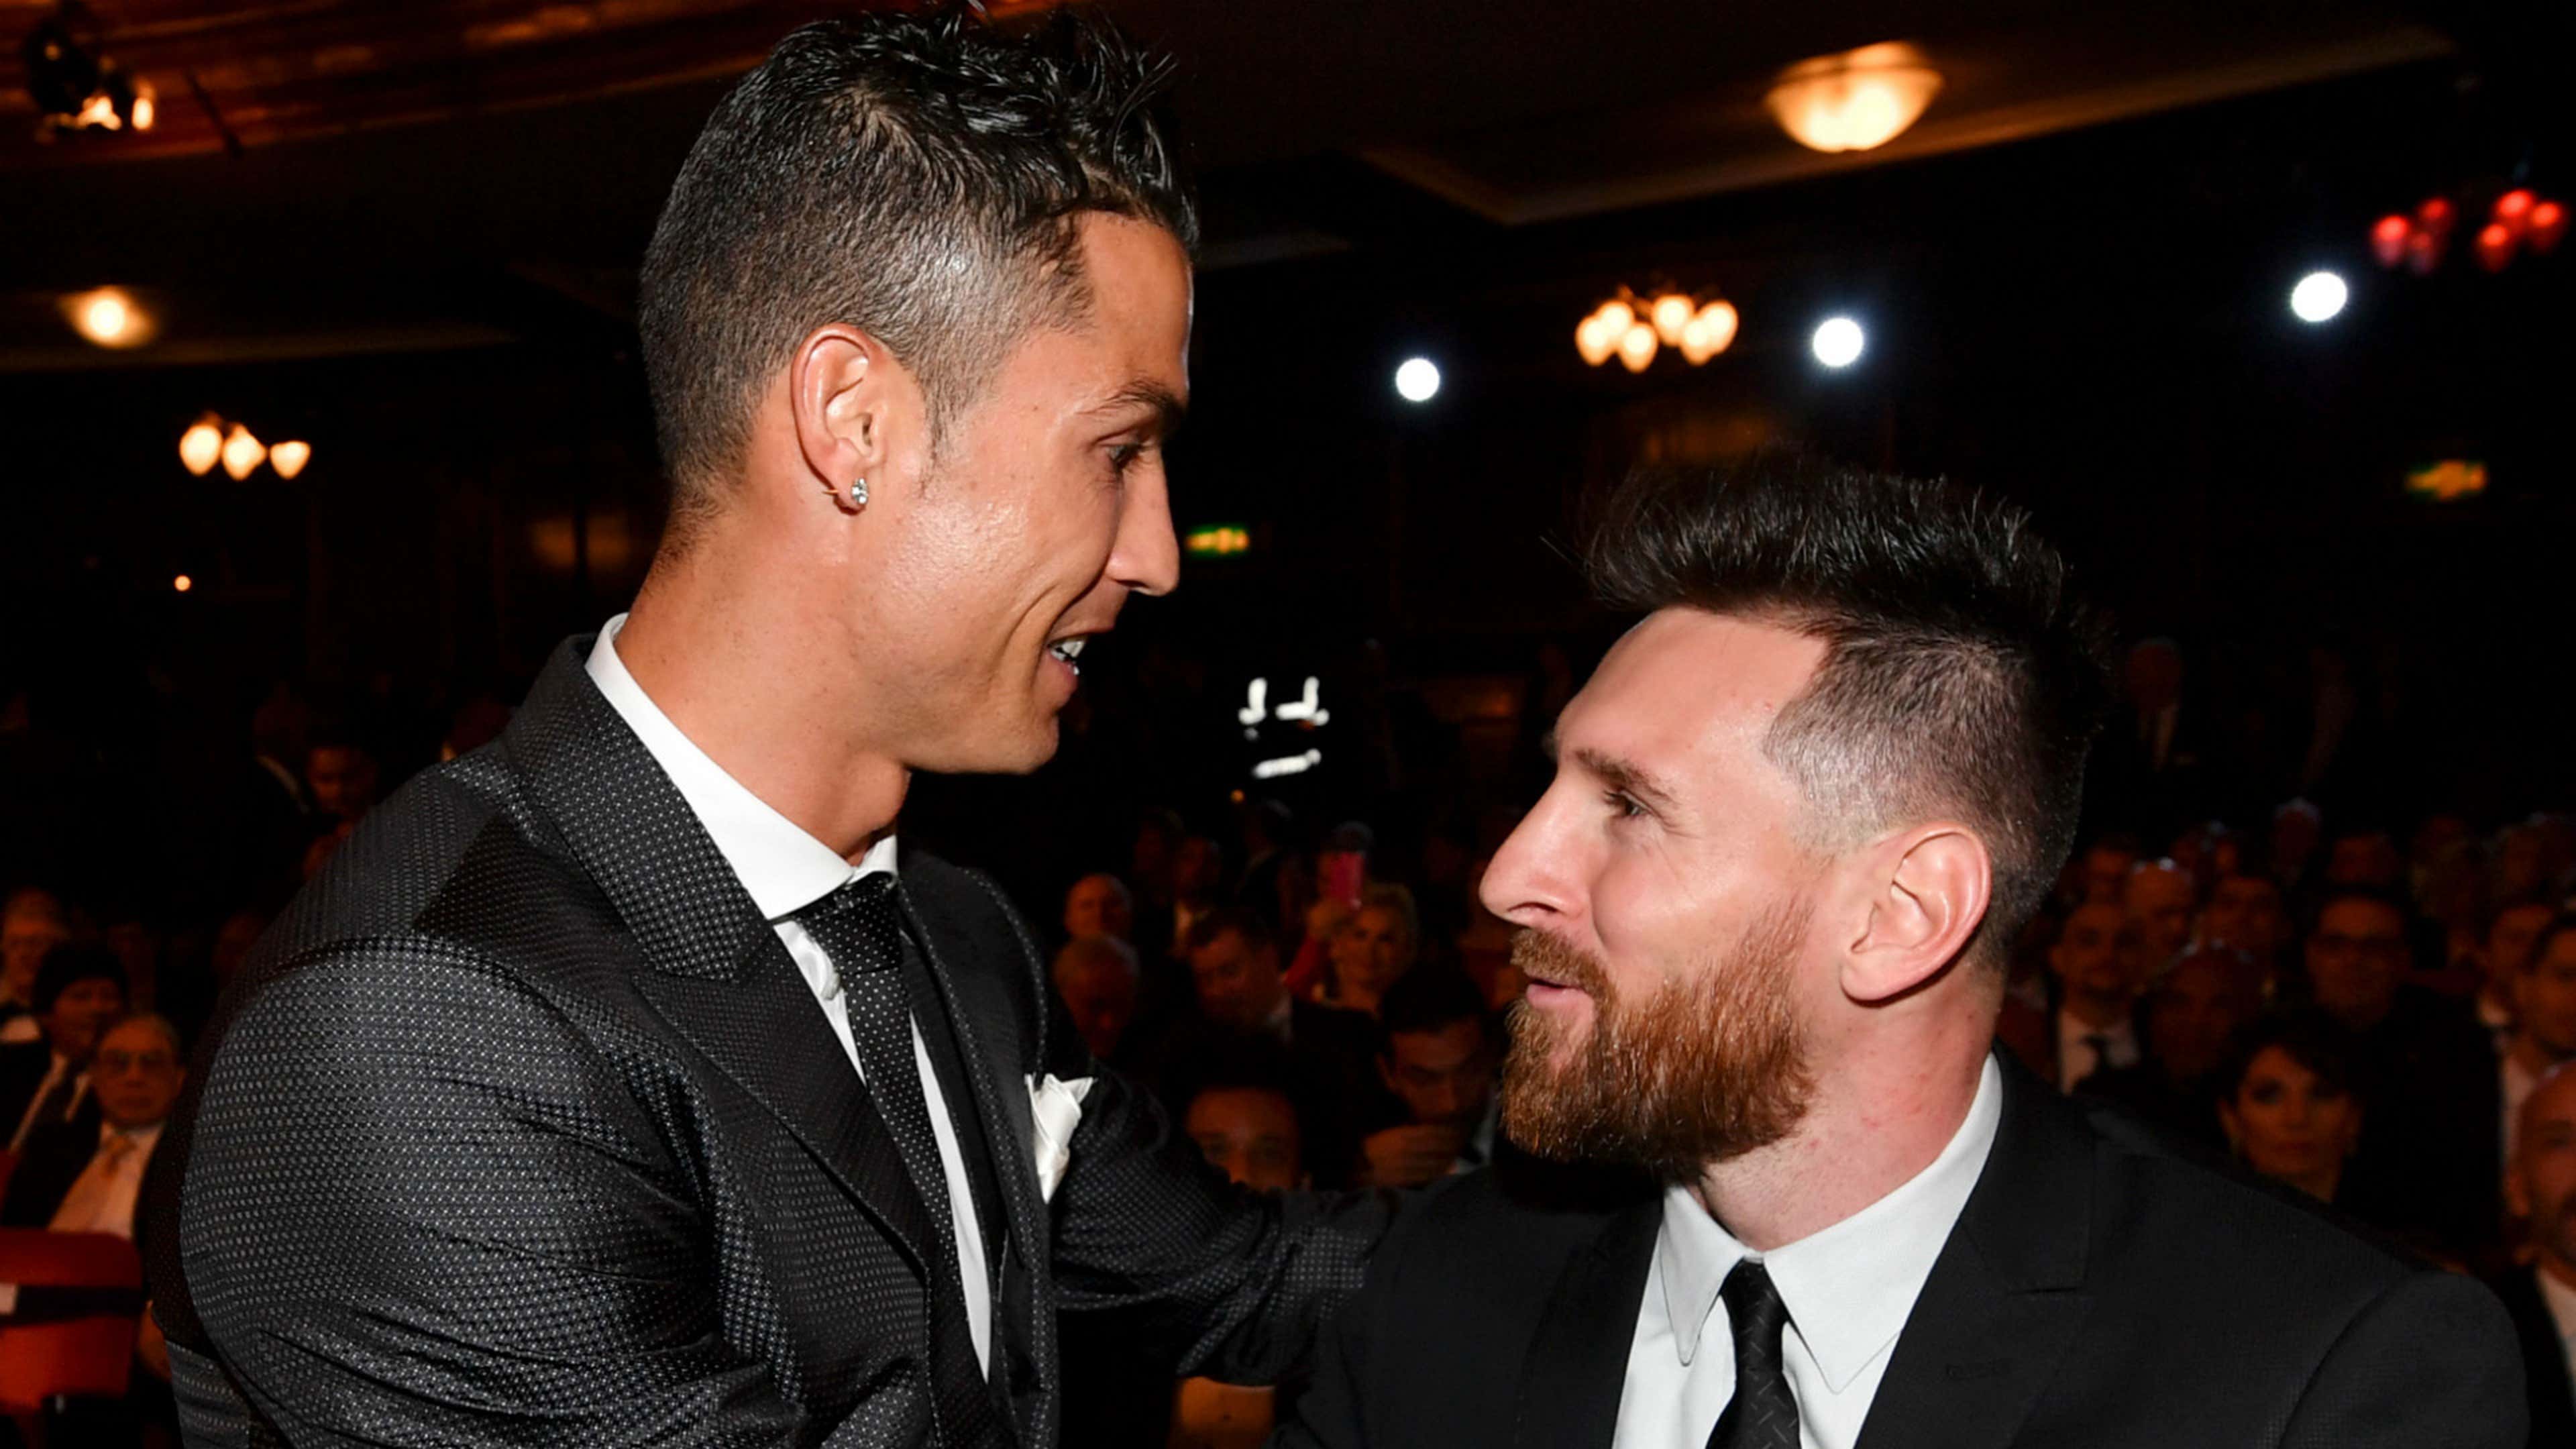 Ronaldo: I have a great relationship with Lionel Messi